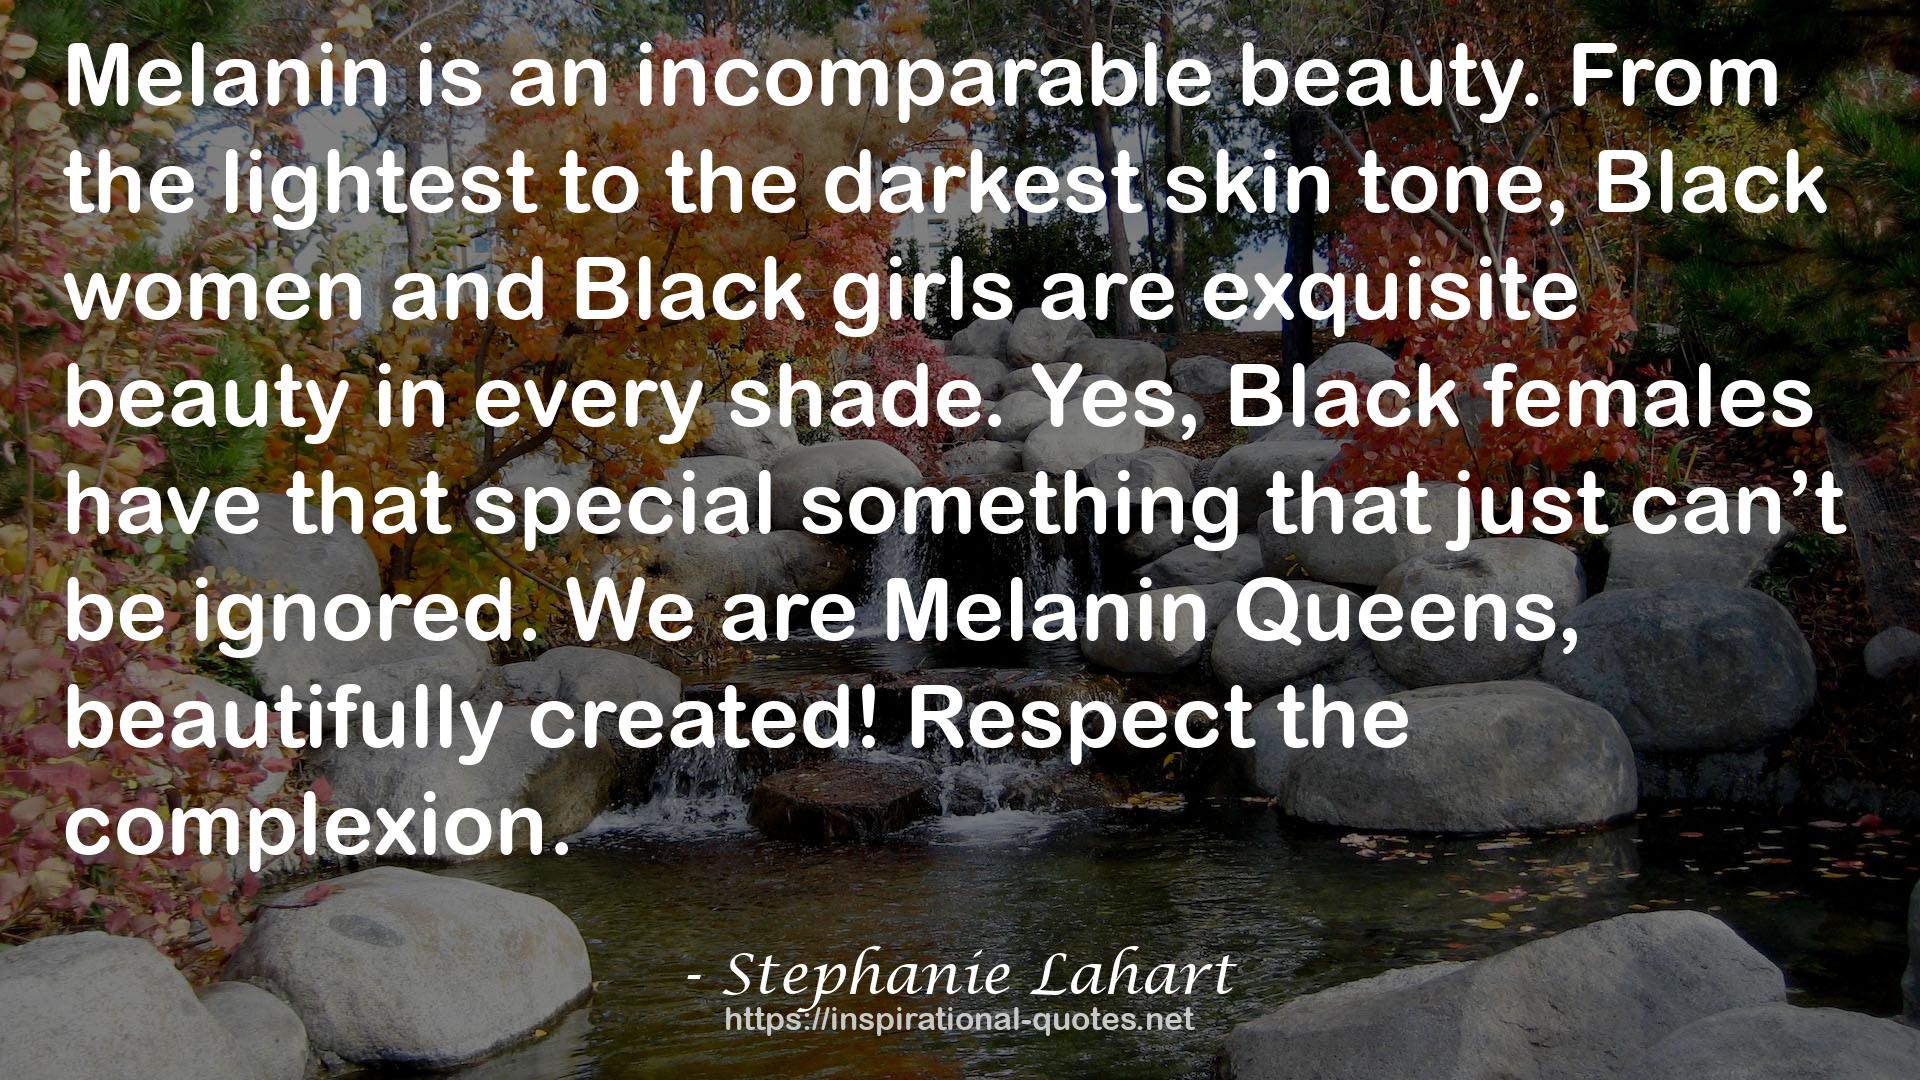 Stephanie Lahart quote : Melanin is an incomparable beauty. From the lightest to the darkest skin tone, Black women and Black girls are exquisite beauty in every shade. Yes, Black females have that special something that just can’t be ignored. We are Melanin Queens, beautifully created! Respect the complexion.